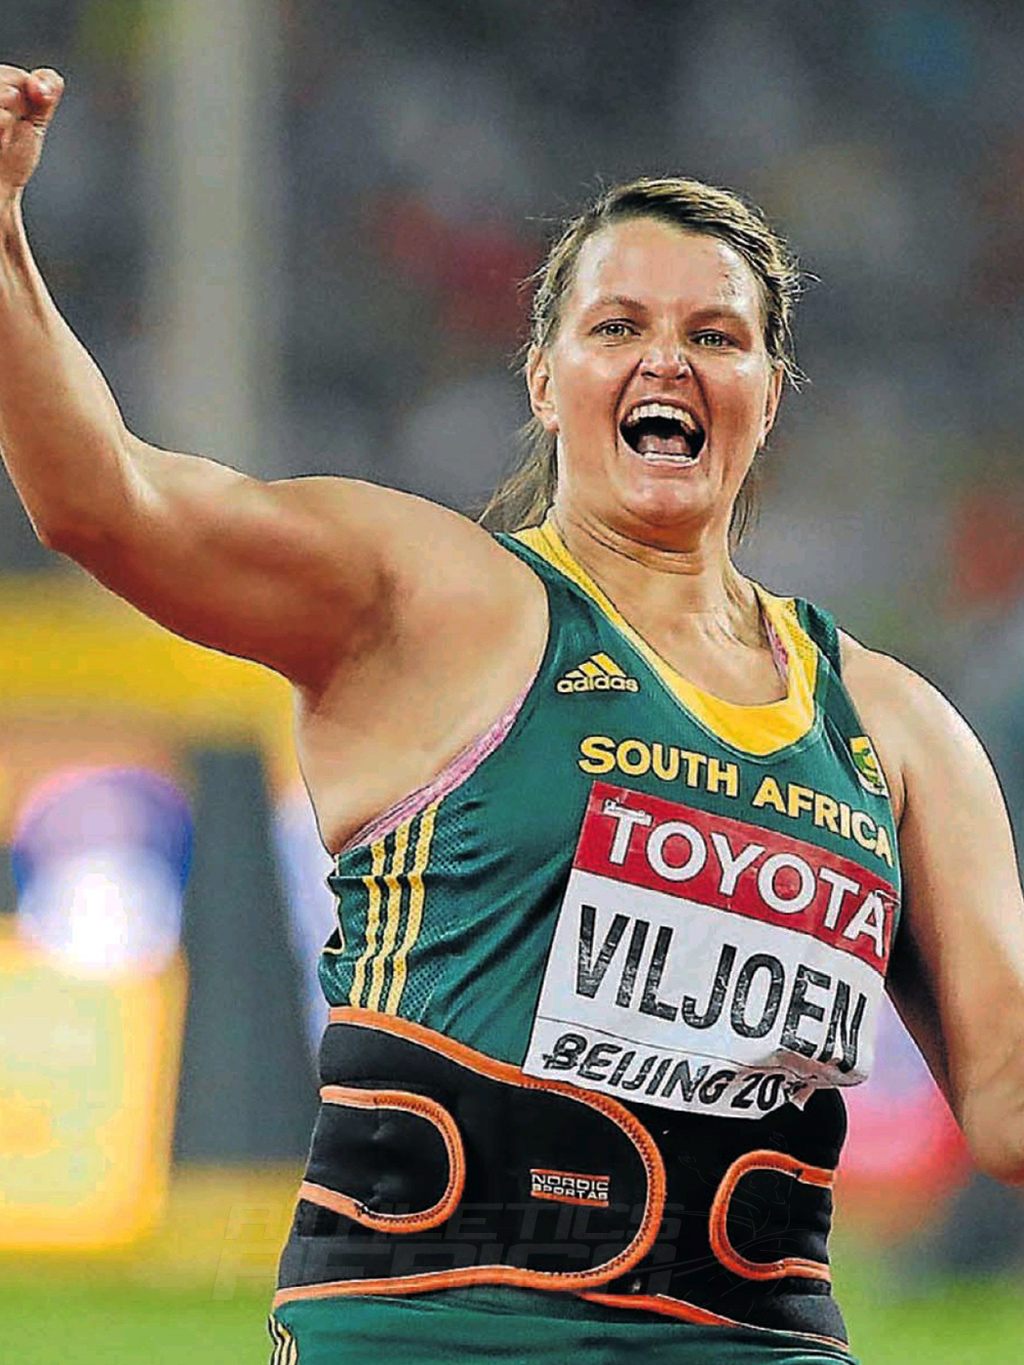 South Africa's Sunette Viljoen celebrates after winning the bronze medal in the women's javelin throw final during the IAAF World Championship Beijing 2015 / Photo credit: Getty Images for the IAAF